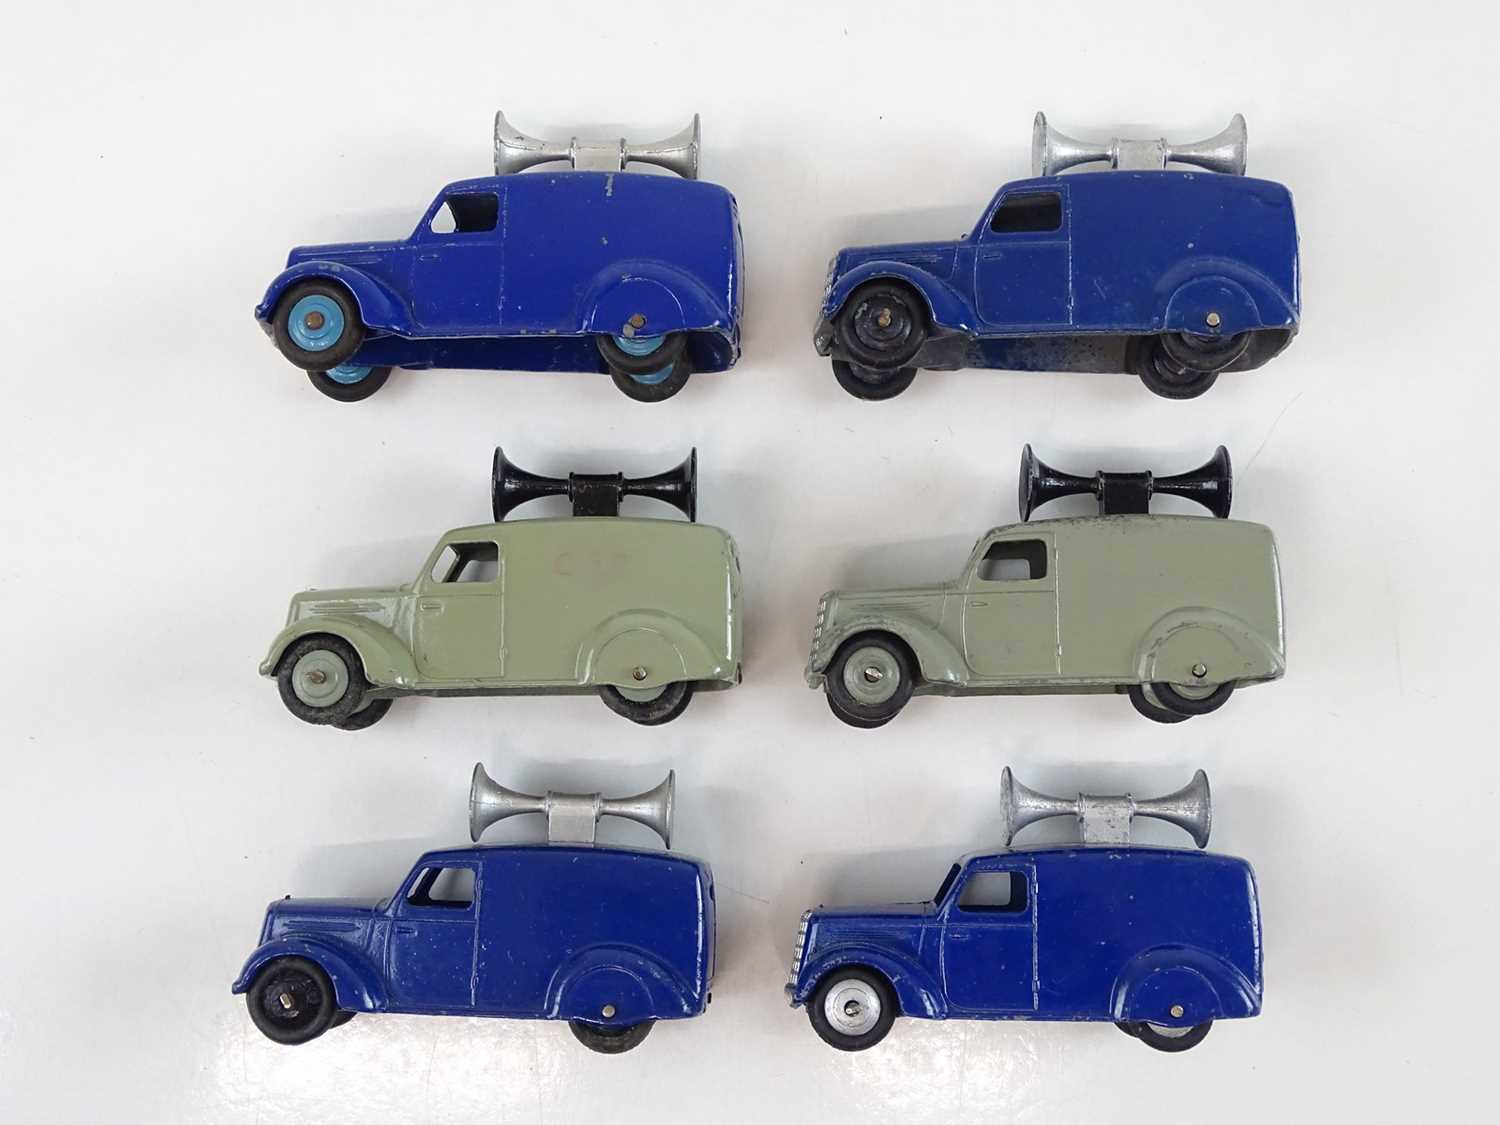 A DINKY 34C Loud Speaker Van trade box complete with 6 examples of the model, 2 in grey and 4 in - Image 6 of 13